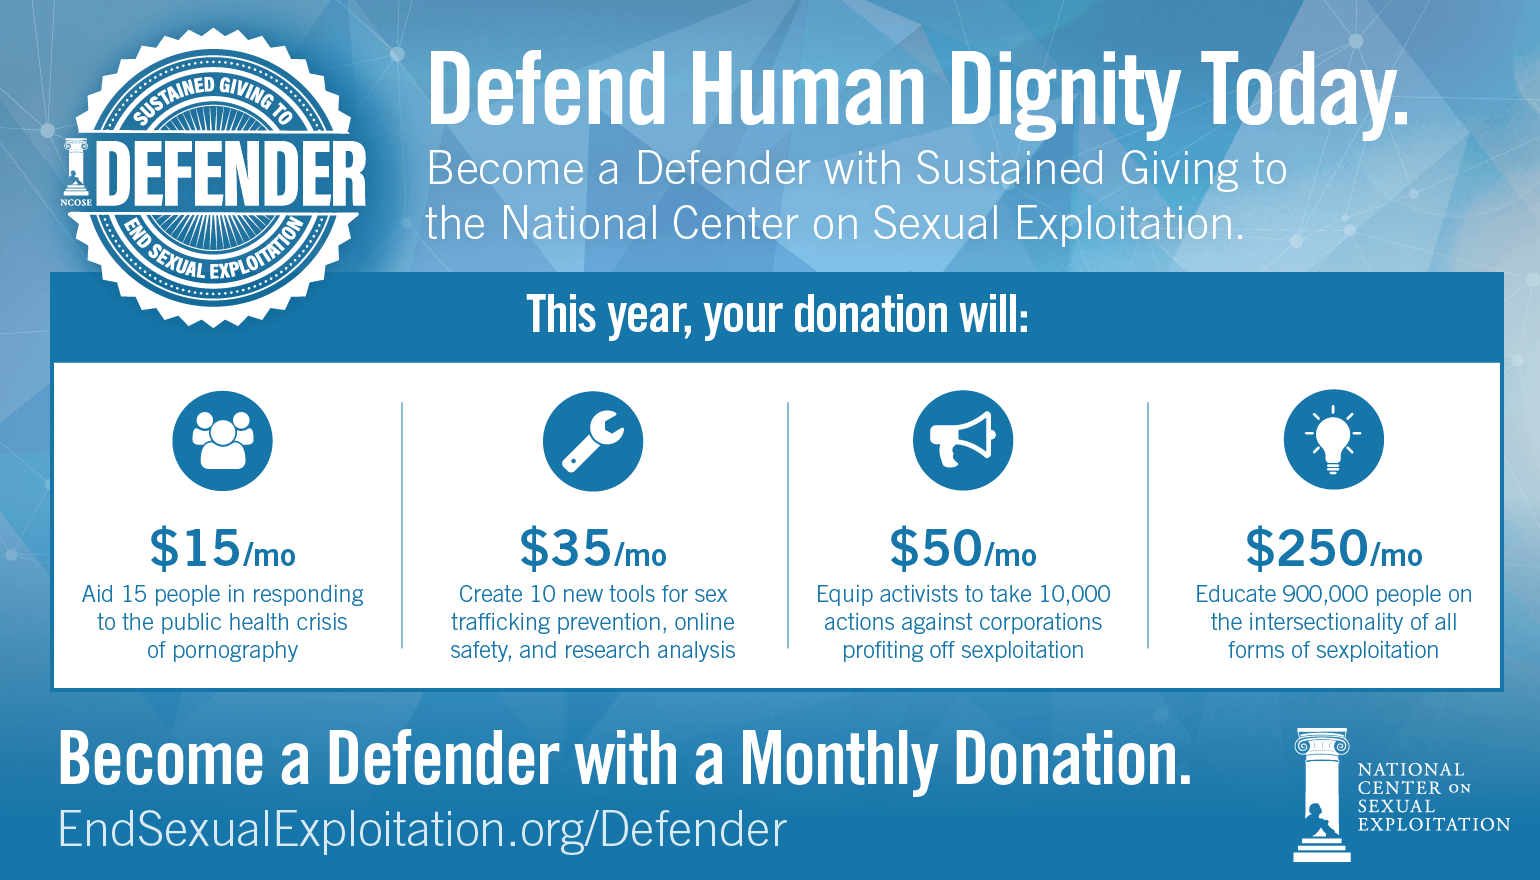 Become a Defender of human dignity